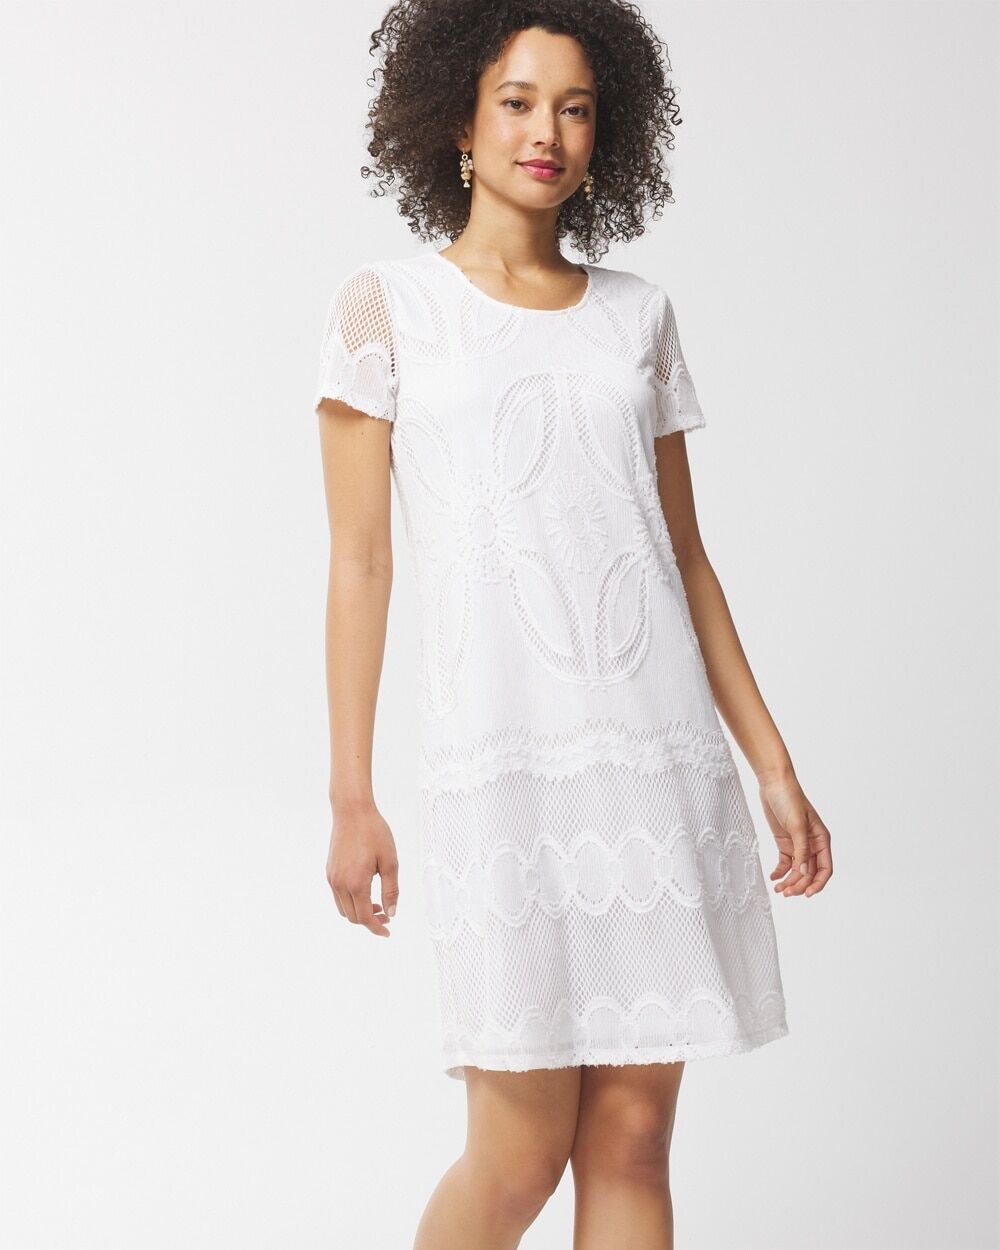 Chico's Off The Rack Women's Lace Knee-Length Dress in White Size 16/18   Chico's Outlet, Spring Dresses - White - Women - Size: 16/18